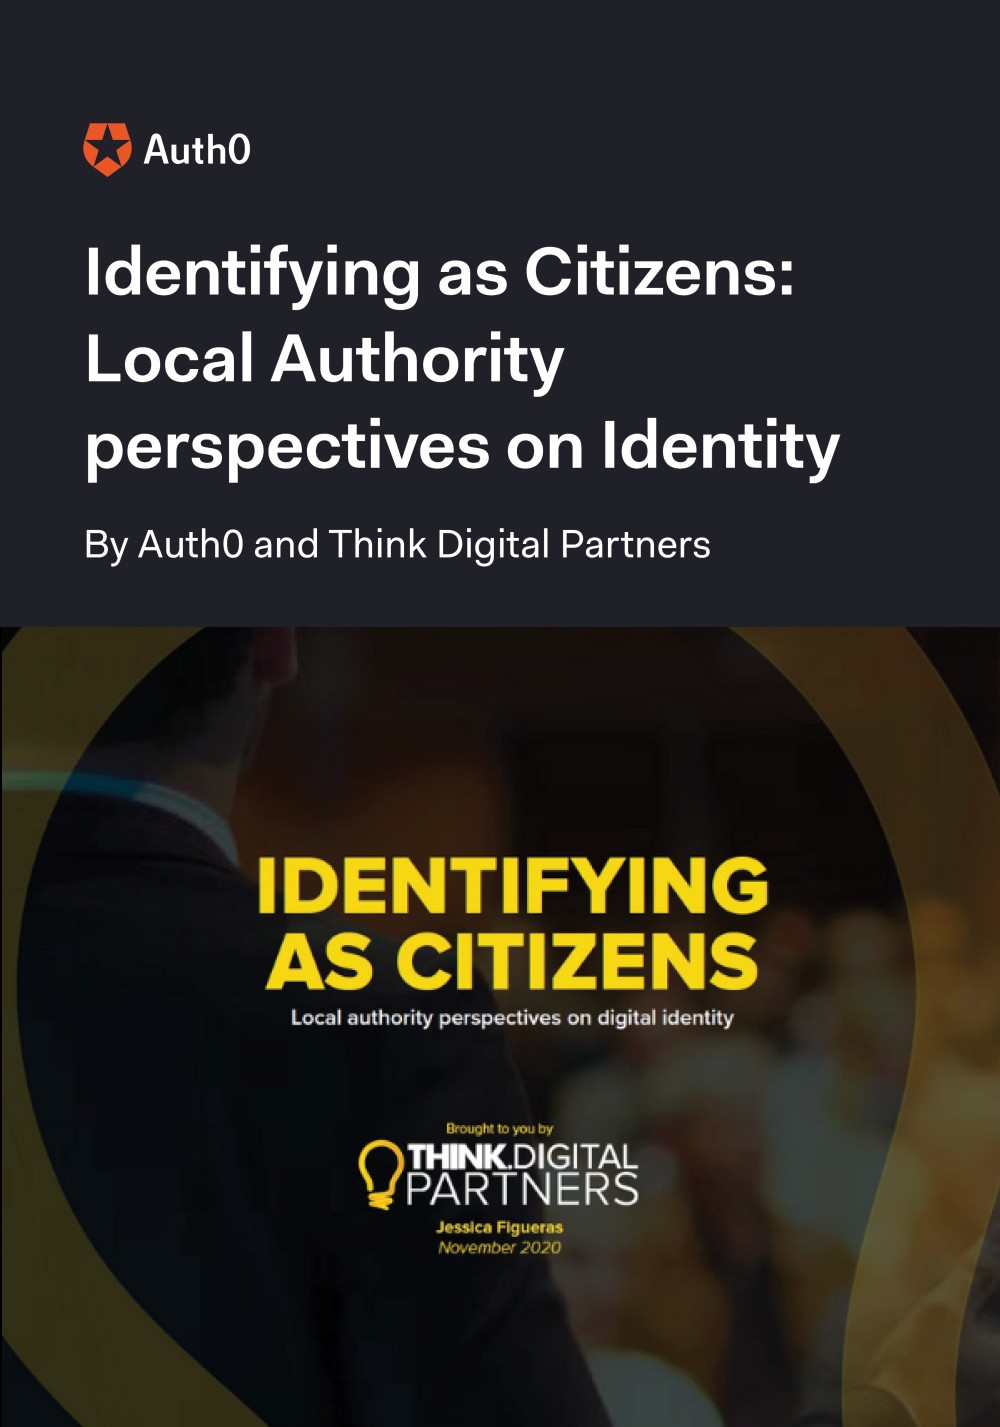 Identifying as Citizens: Local Authority perspectives on Identity